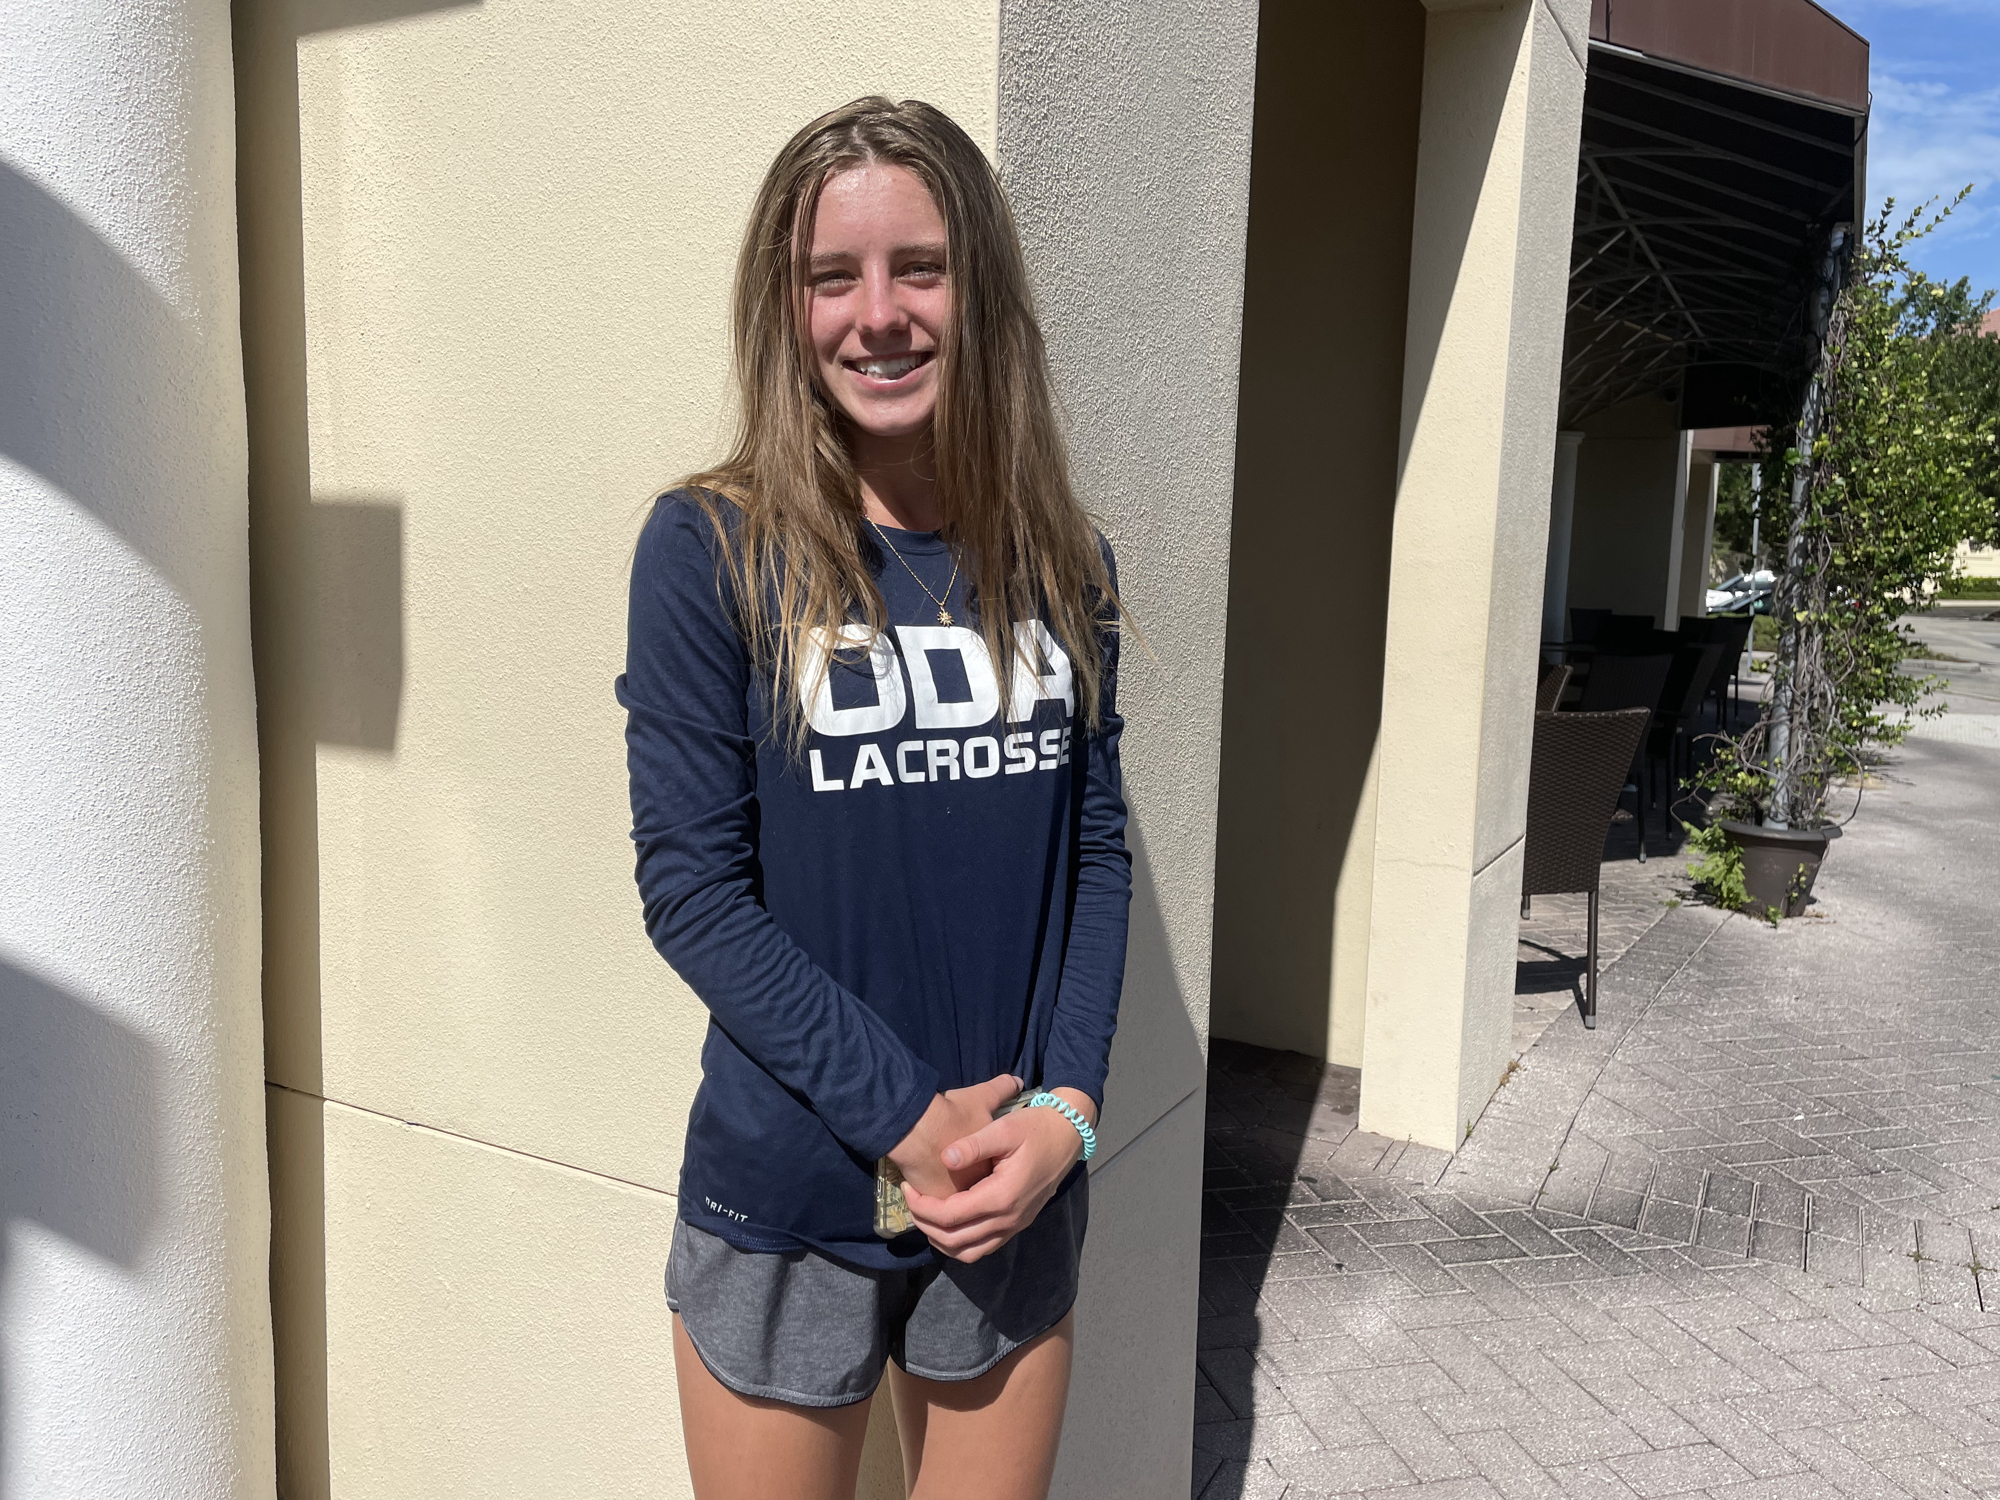 4. ODA sophomore girls lacrosse player Aubrey Robbins made a name for herself at the high school and club levels in 2021. She had 62 goals and 26 assists for the Thunder.